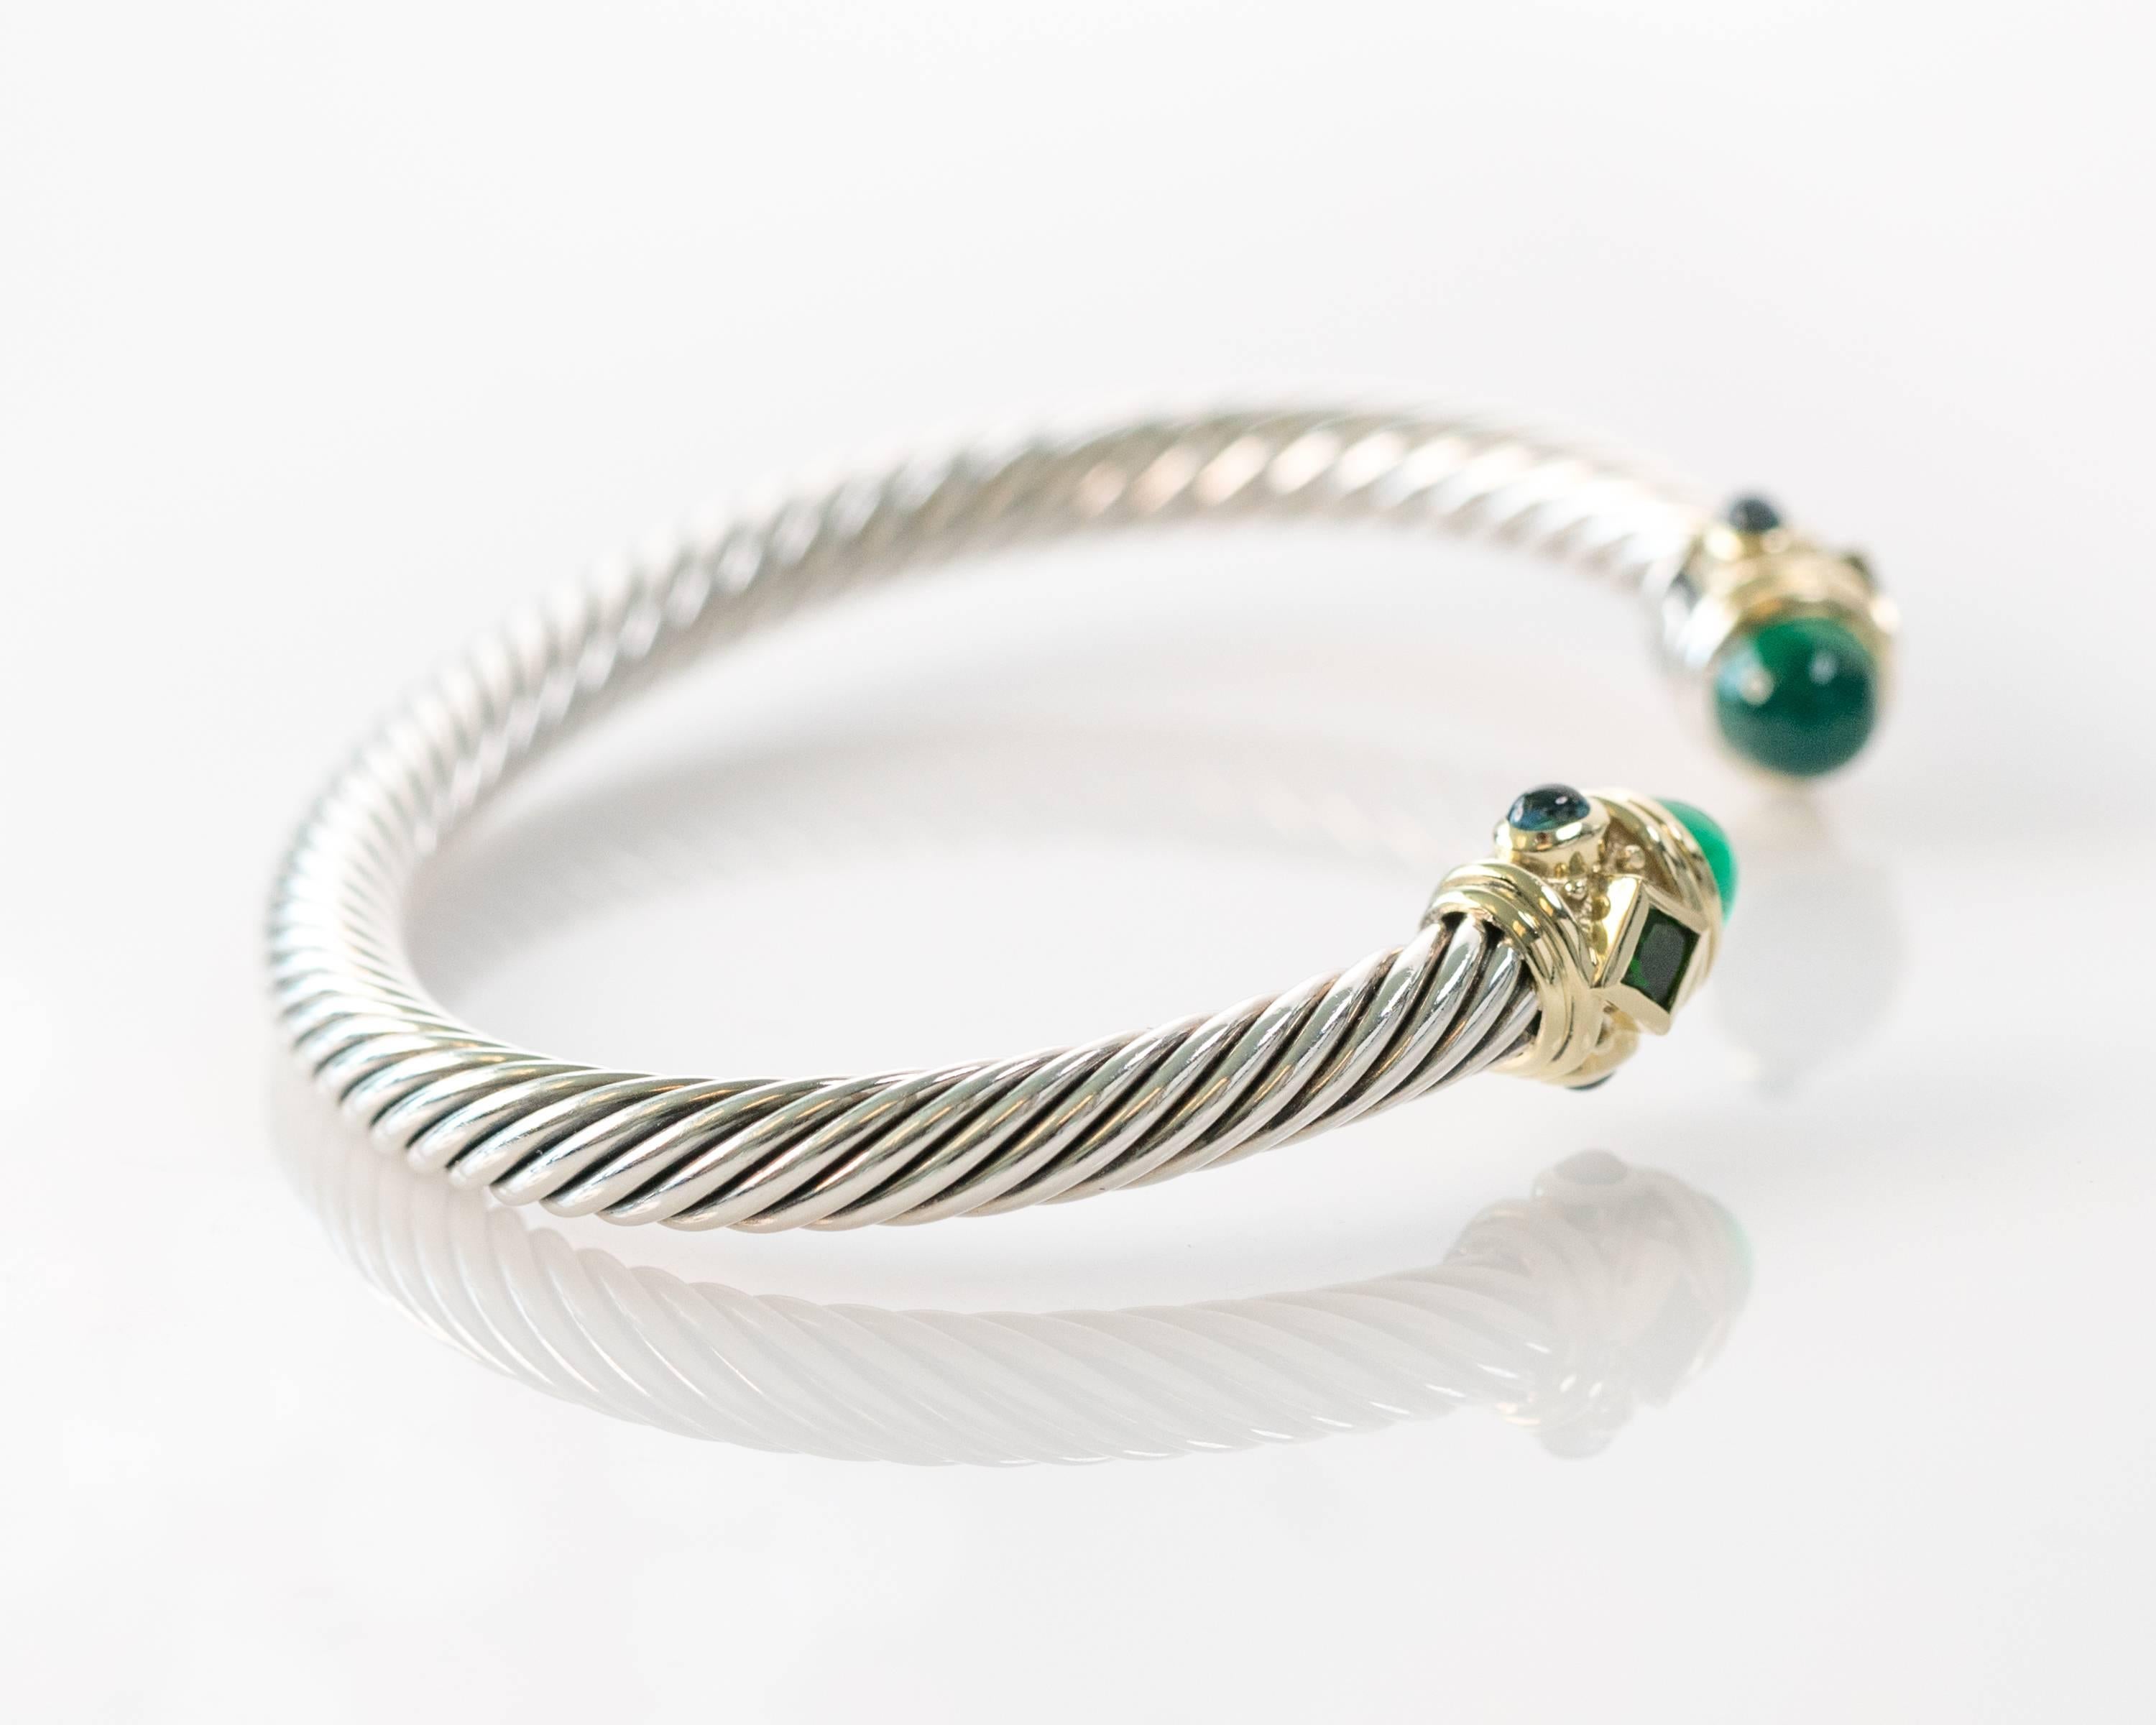 This Brand New, Unused, Unworn David Yurman Cable Collection Renaissance Bracelet is crafted from Sterling Silver and 14 Karat Yellow Gold. This handsome bracelet features 2 Chrome Diopside cabochons, 2 bezel set faceted Green Onyx and 4 bezel set